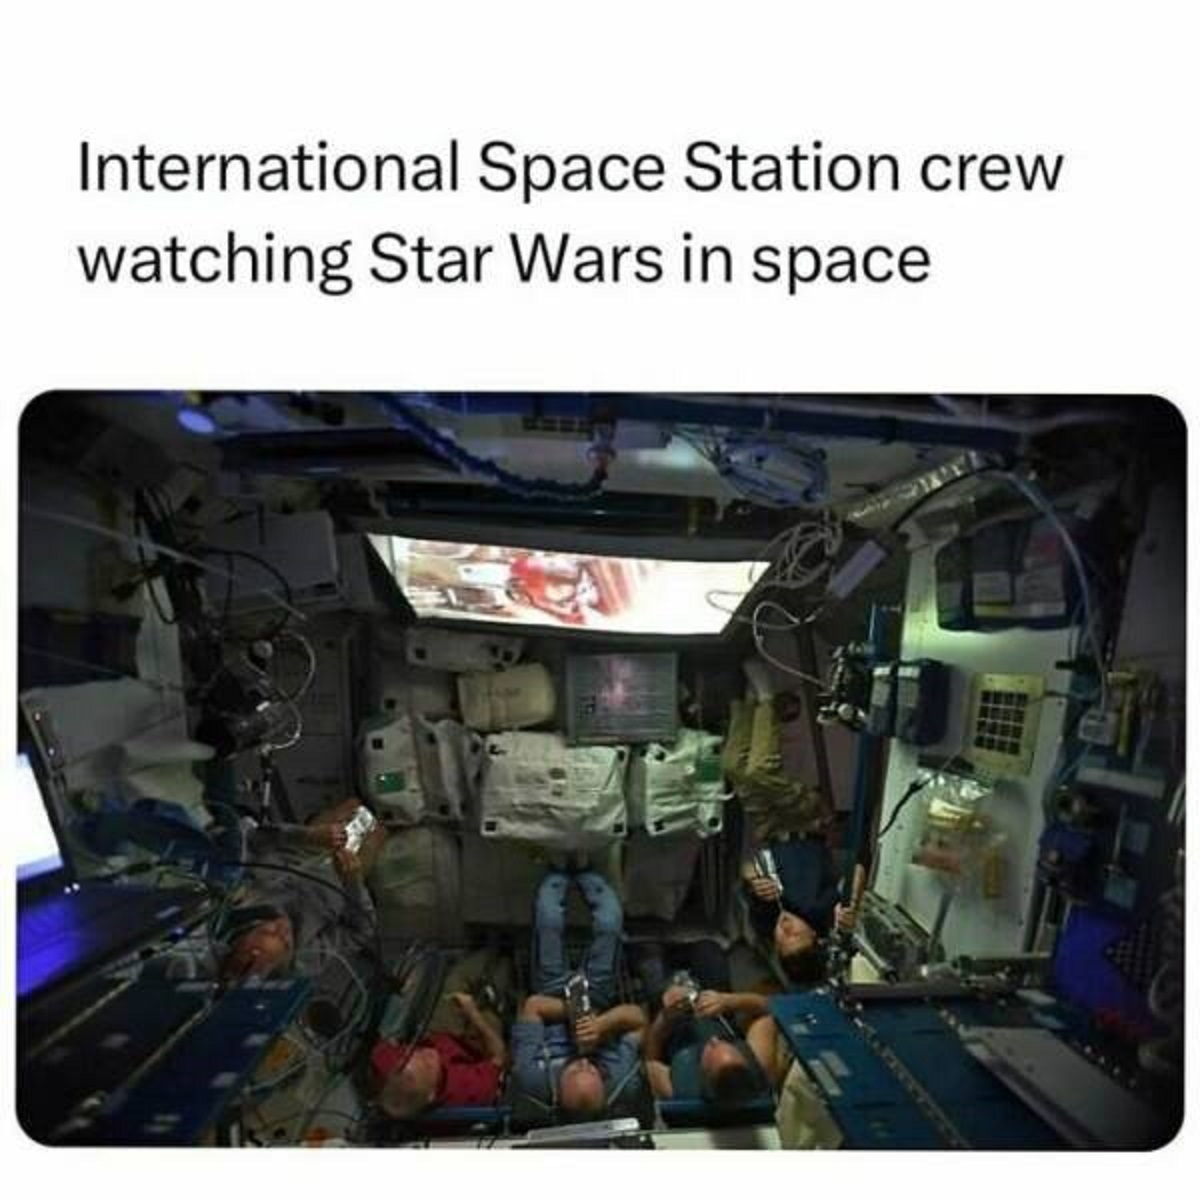 astronauts watching movies in space - International Space Station crew watching Star Wars in space